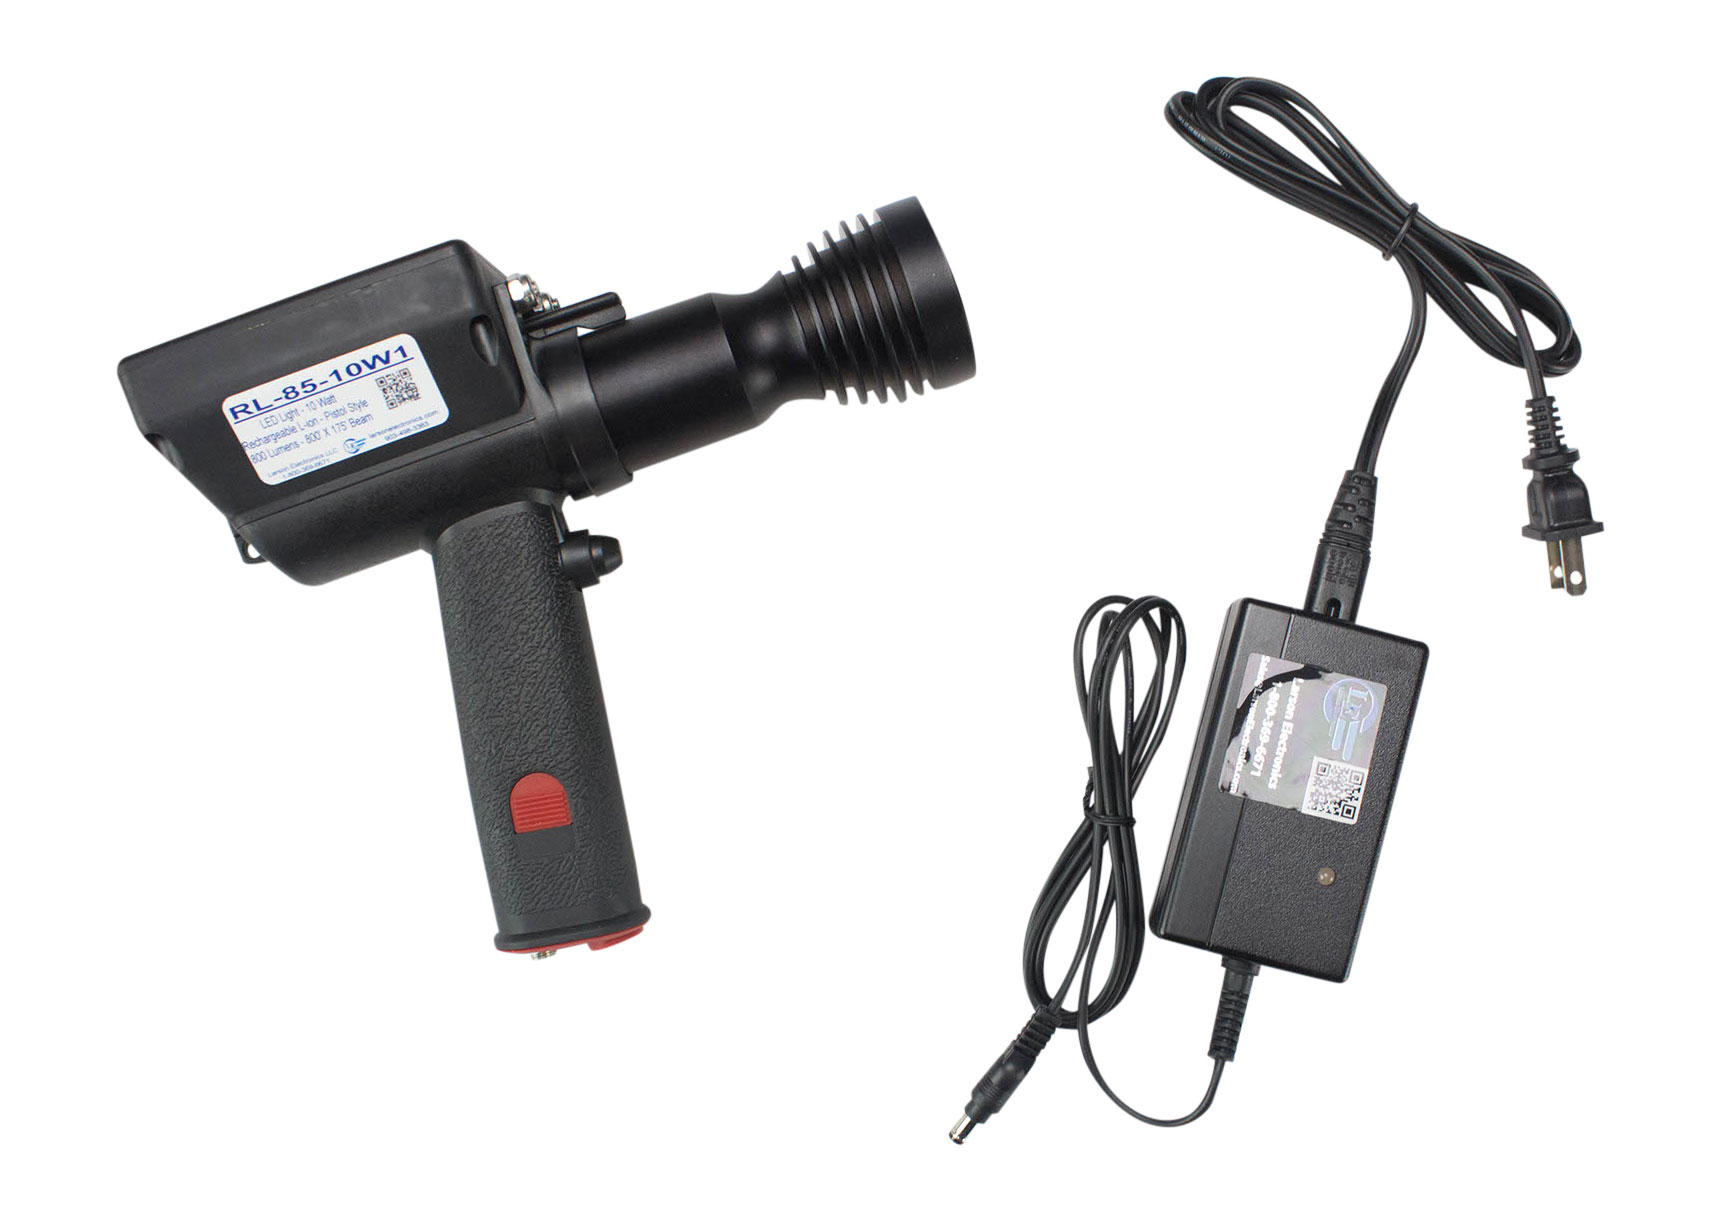 Rechargeable Handheld LED Spotlight to use for scouting the land